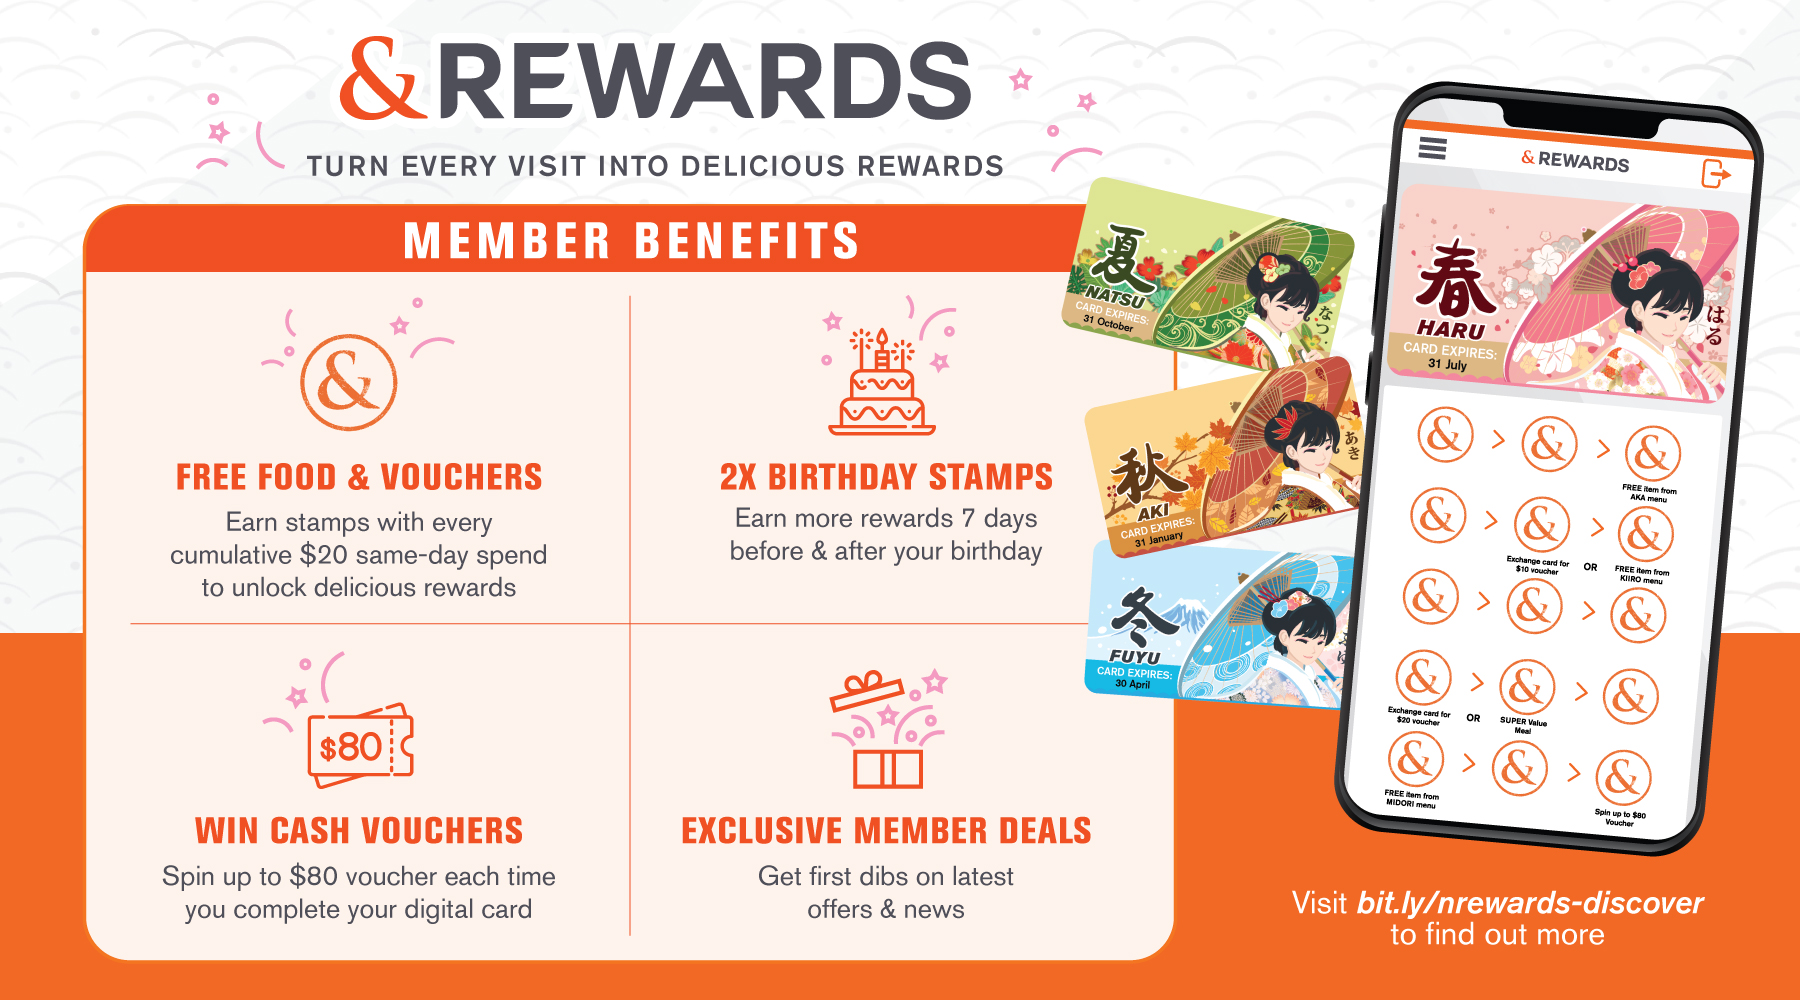 Earn stamps and FREE vouchers with &Rewards!